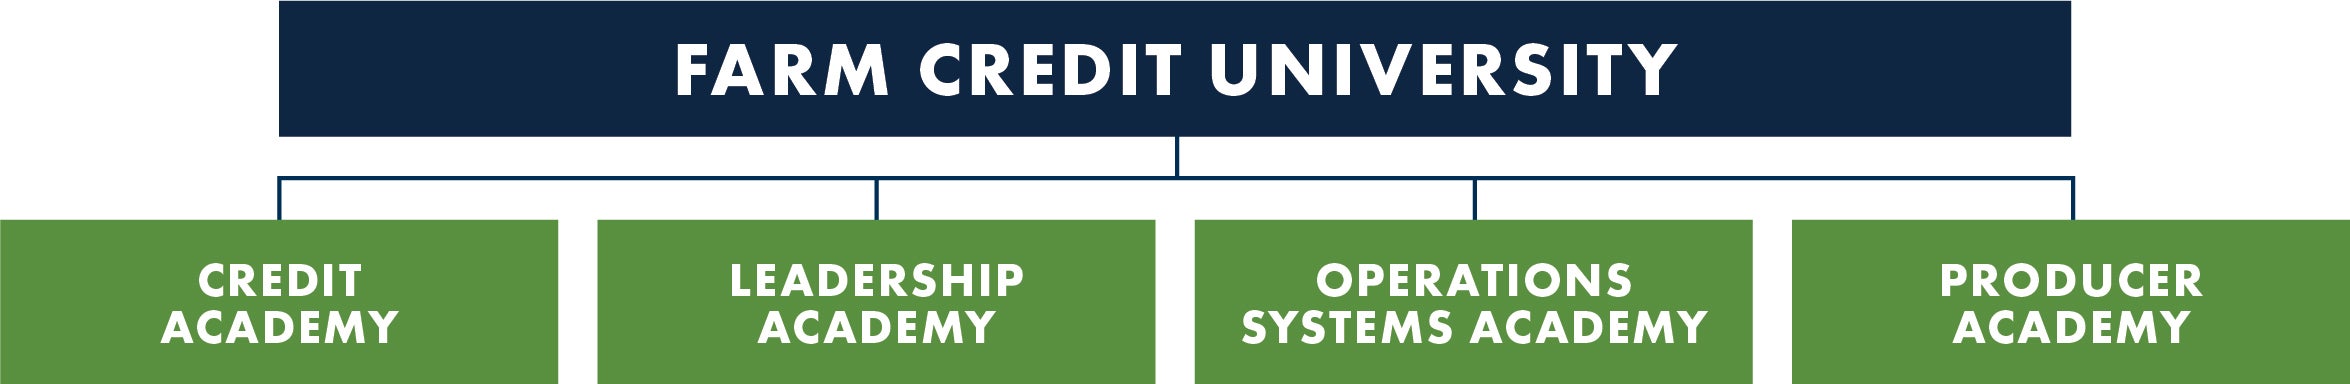 Farm Credit University: Credit Academy, Leadership Academy, Operations Systems Academy, and Producer Academy